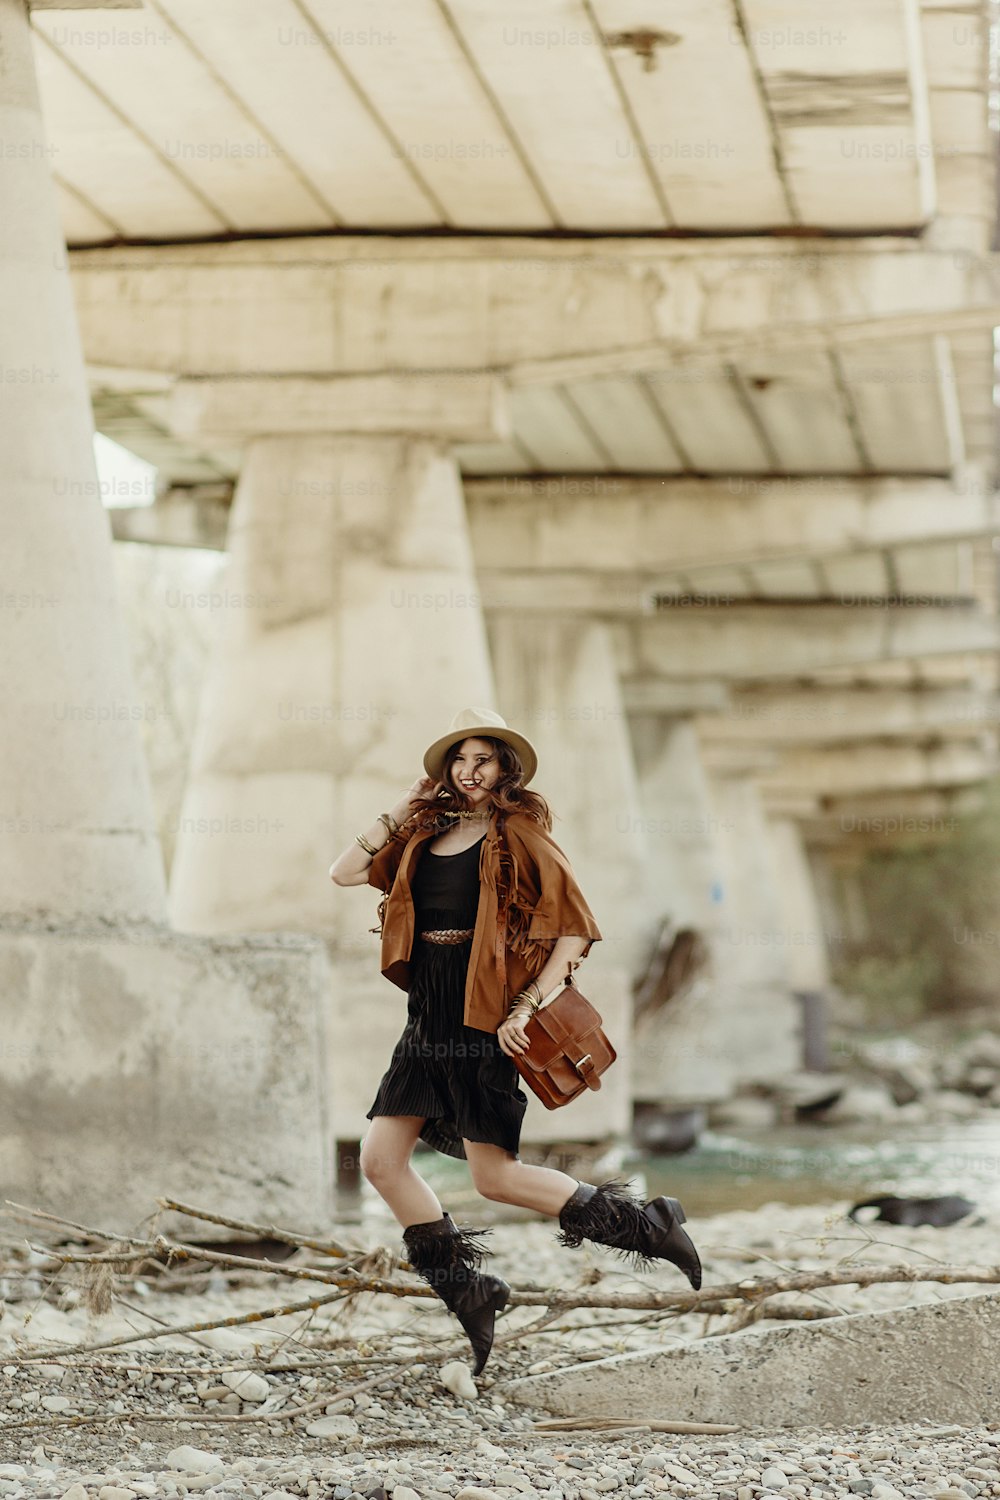 stylish boho woman jumping, having fun, in hat, leather bag, fringe poncho and boots  near river under bridge stone. girl in gypsy hippie look young traveler. joyful moments